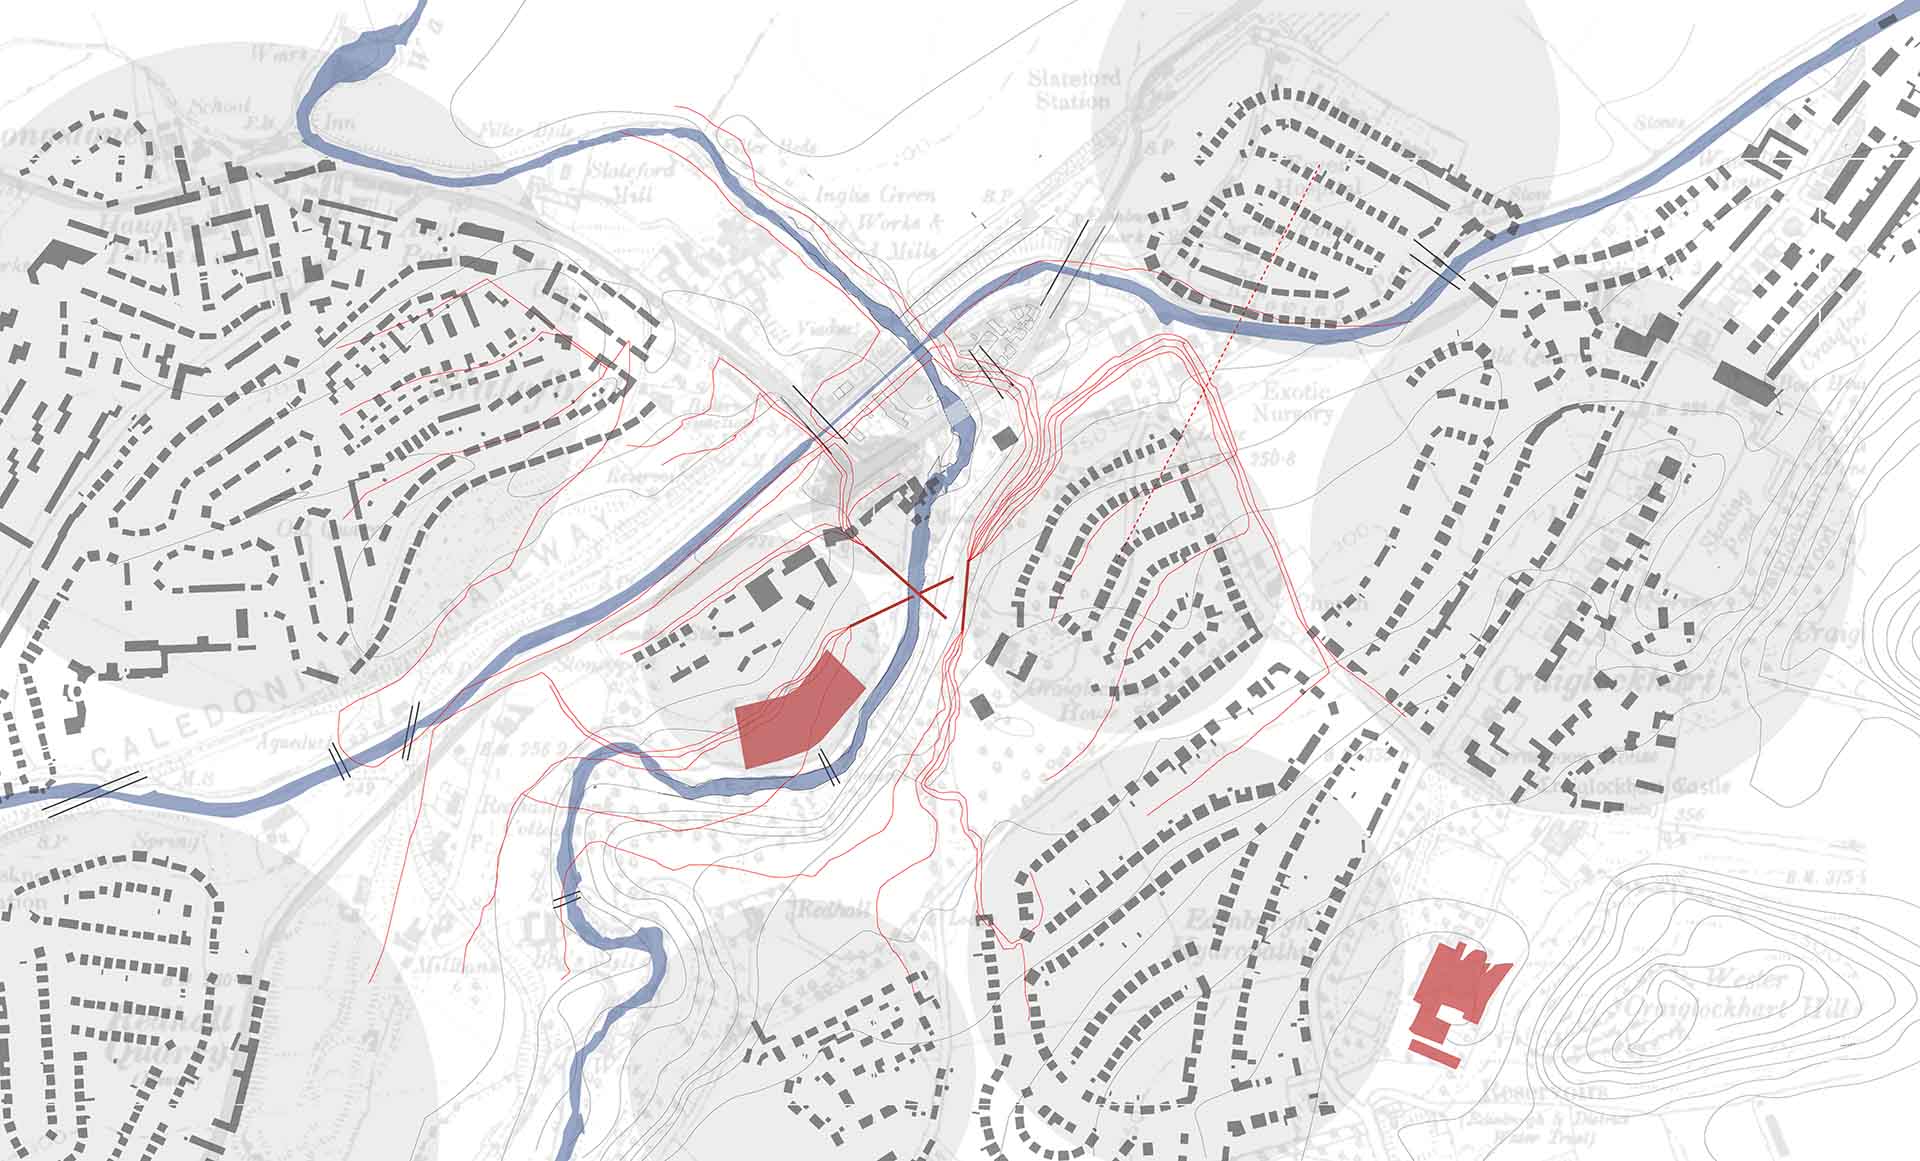 Analysis of neighbourhood boundaries, river boundaries, pedestrian flows and boundary crossing points to be manipulated by the Hydro Research Centre addition.